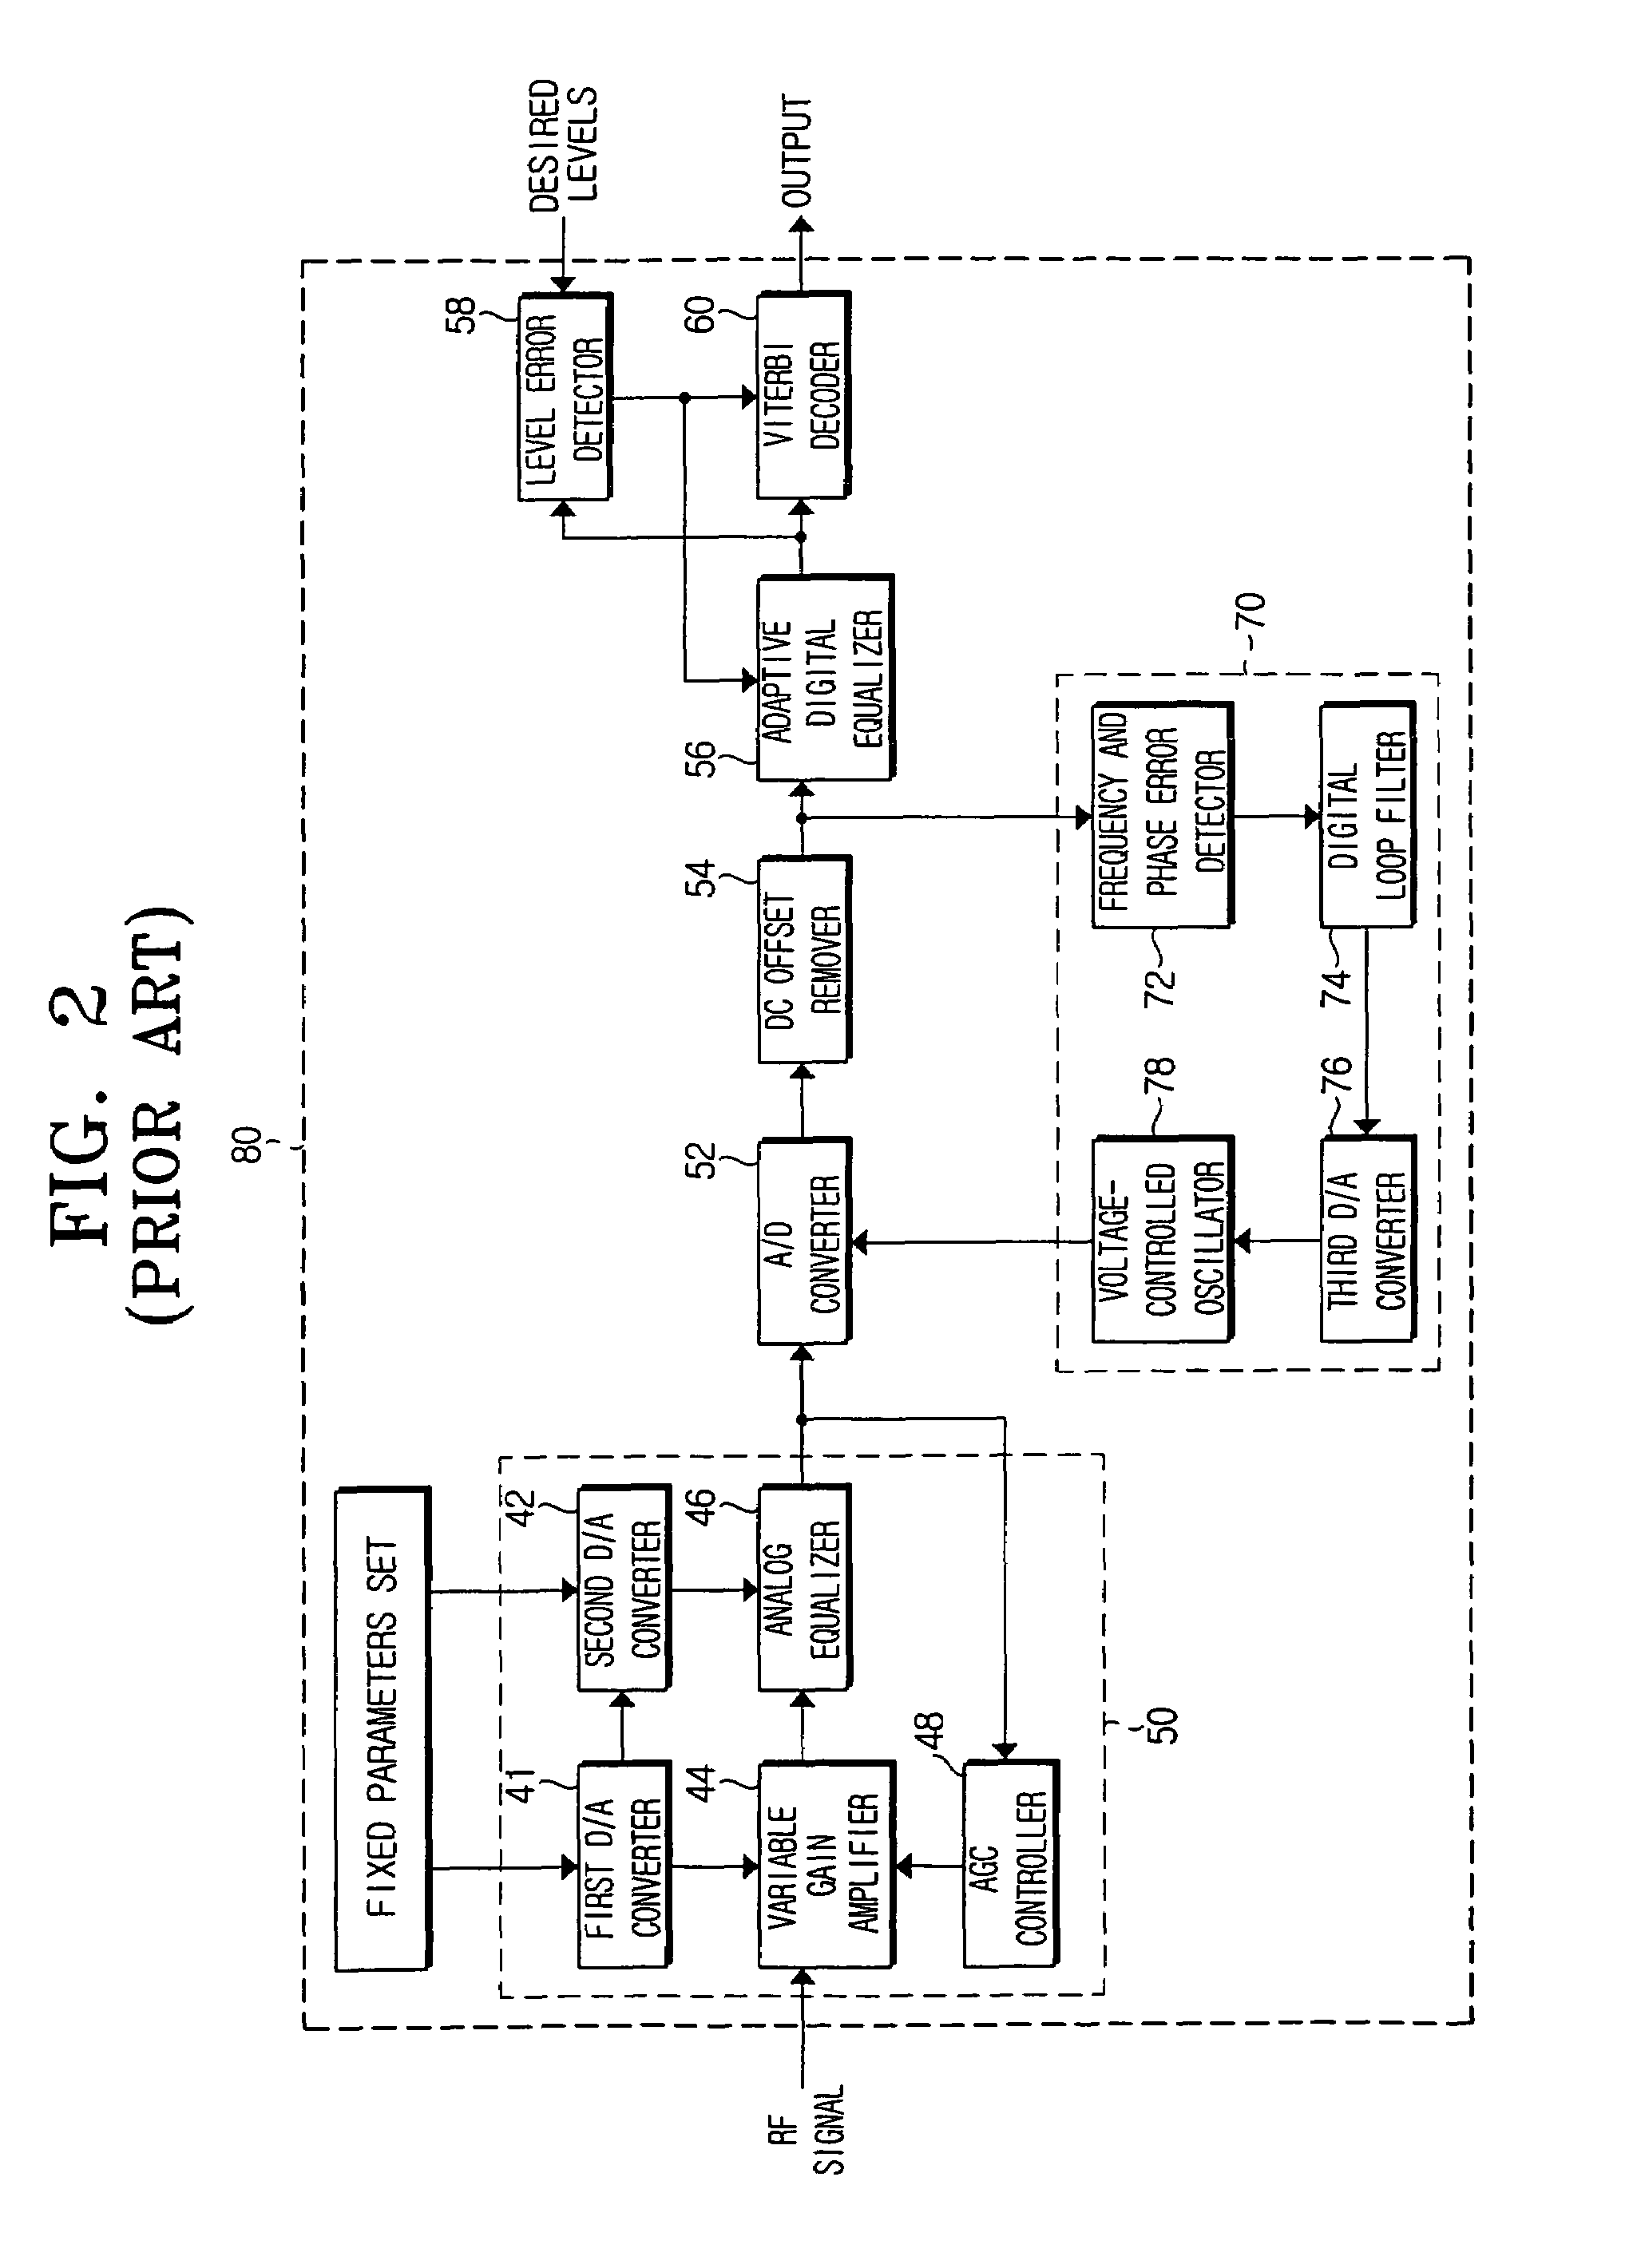 High-speed mixed analog/digital PRML data detection and clock recovery apparatus and method for data storage